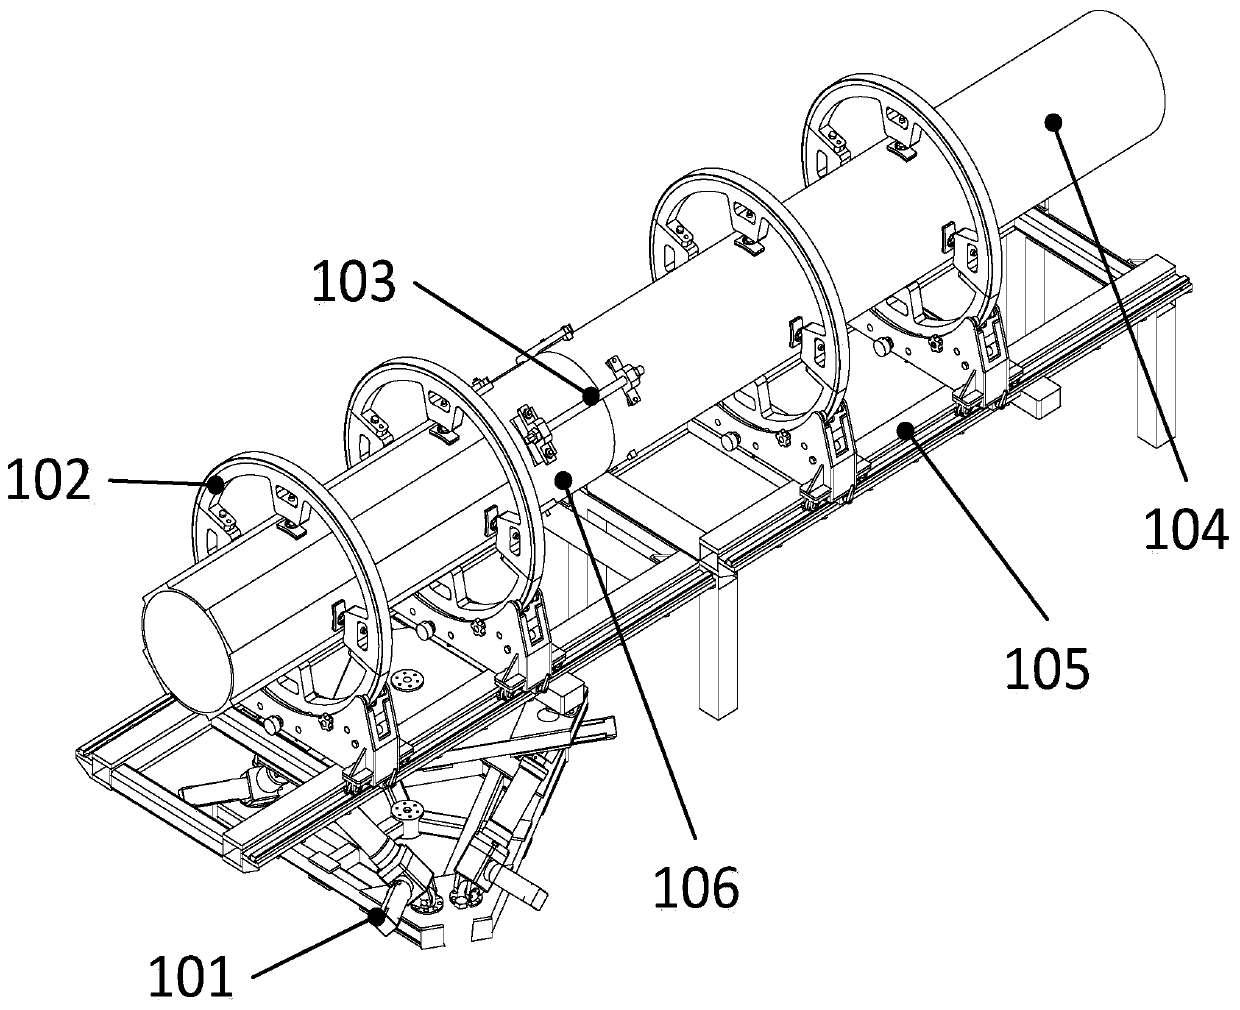 Cabin section rapid pose adjusting and tensioning device based on six-axis platform